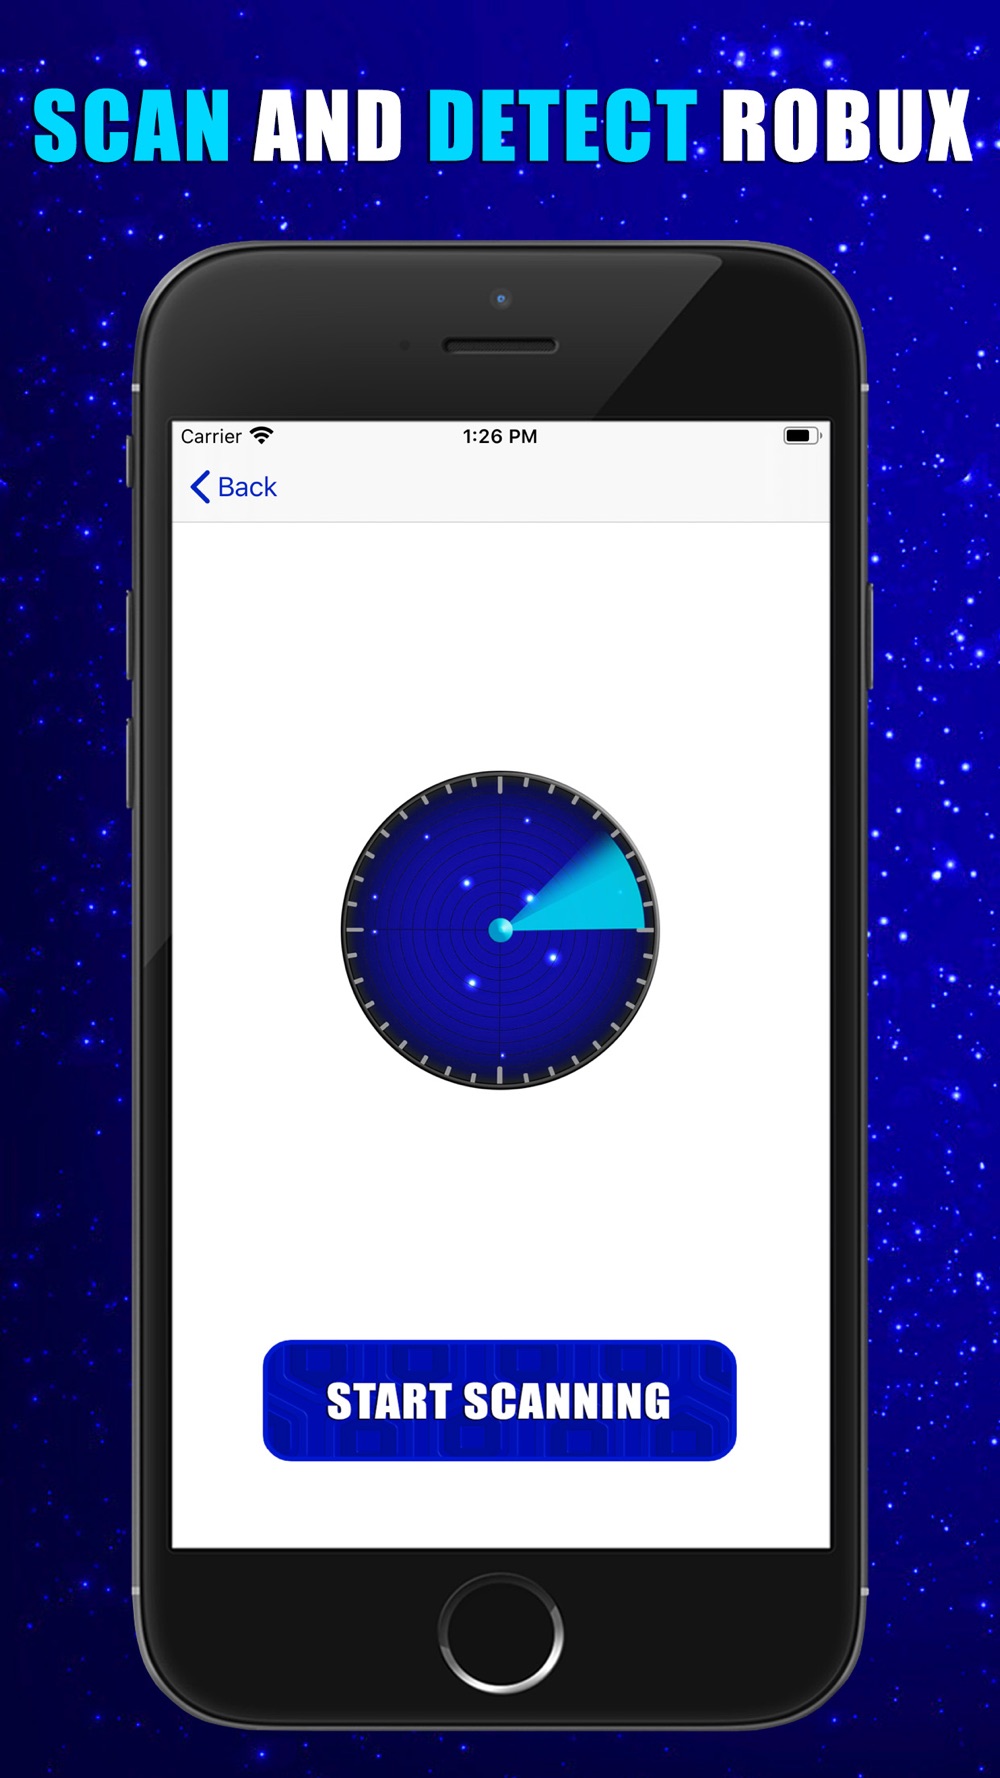 Robux Radar Scanner For Roblox Free Download App For Iphone Steprimo Com - iphone roblox app